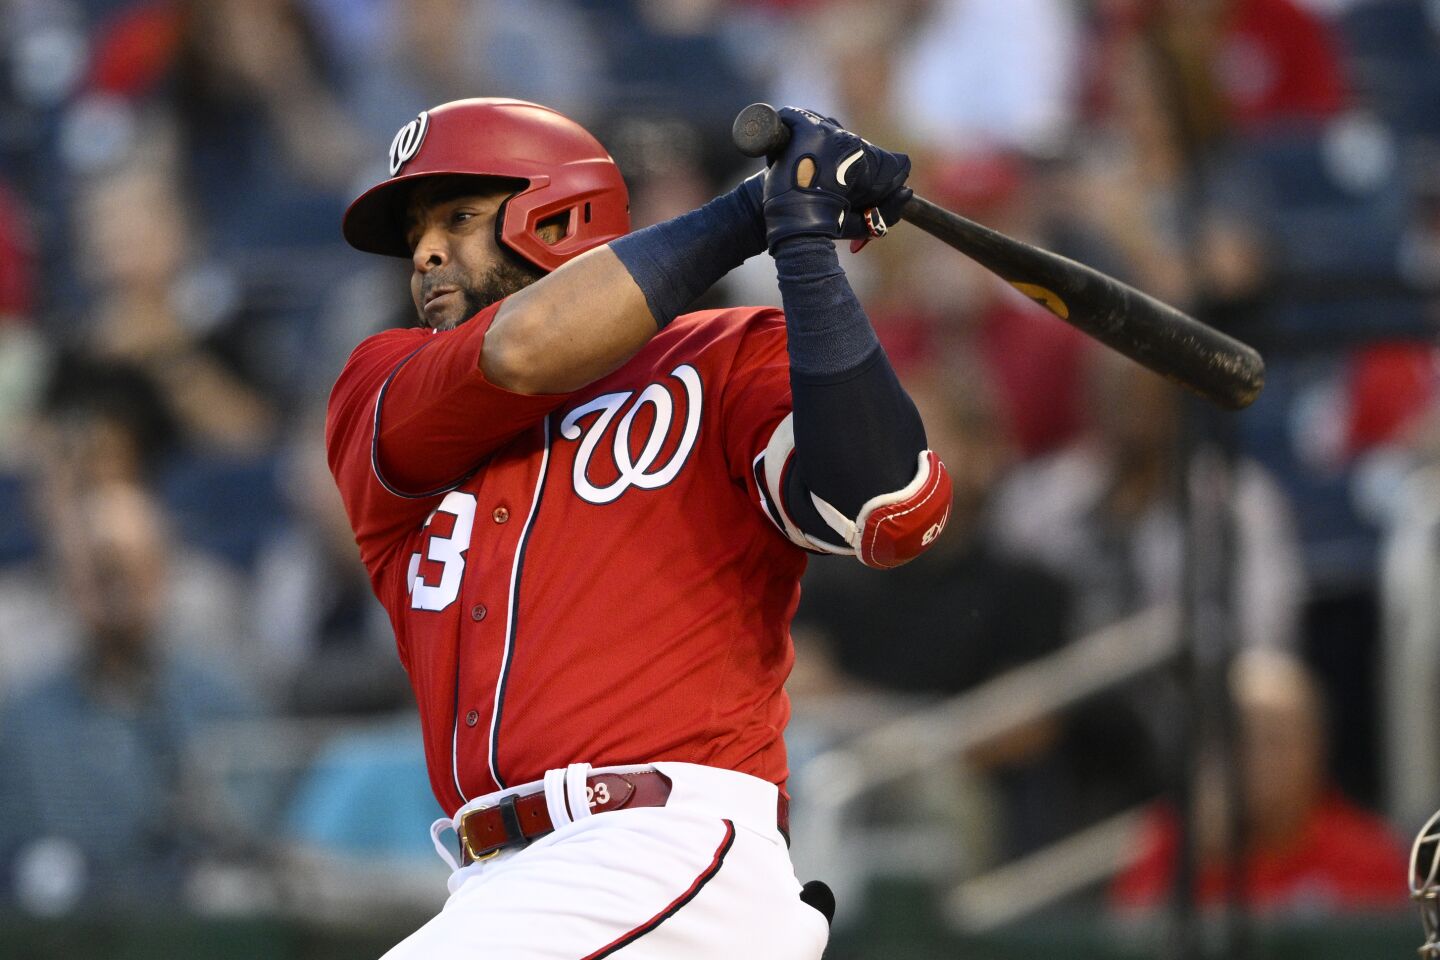 Trending: WashingtonThe Nationals’ minus-212 run differential is 44 runs worse than the next-worst team (the Pirates), due in large part to leading the majors with 662 runs allowed as a pitching staff. Without Juan Soto and Josh Bell in the lineup, they’ve lost 11 of 14. DH Nelson Cruz leads the team with 58 RBIs, but has just nine homers and a .237/.319/.351 batting line. OF Lane Thomas leads active Nationals with 11 homers but is hitting just .234/.285/.396 on the season. New 1B Luke Voit, acquired in the Soto/Bell trade, has three homers and a .234/.333/.426 batting line in 13 games with Washington while 1B Joey Meneses has five homers in his first 13 games in the majors (1.058 OPS). Former Padres SS CJ Abrams is 1-for-11 since this week’s recall from the minors. In the bullpen, RHP Kyle Finnegan (3.40 ERA) is 5-for-9 in save chances but has a 2.04 ERA over his last 15 appearances.